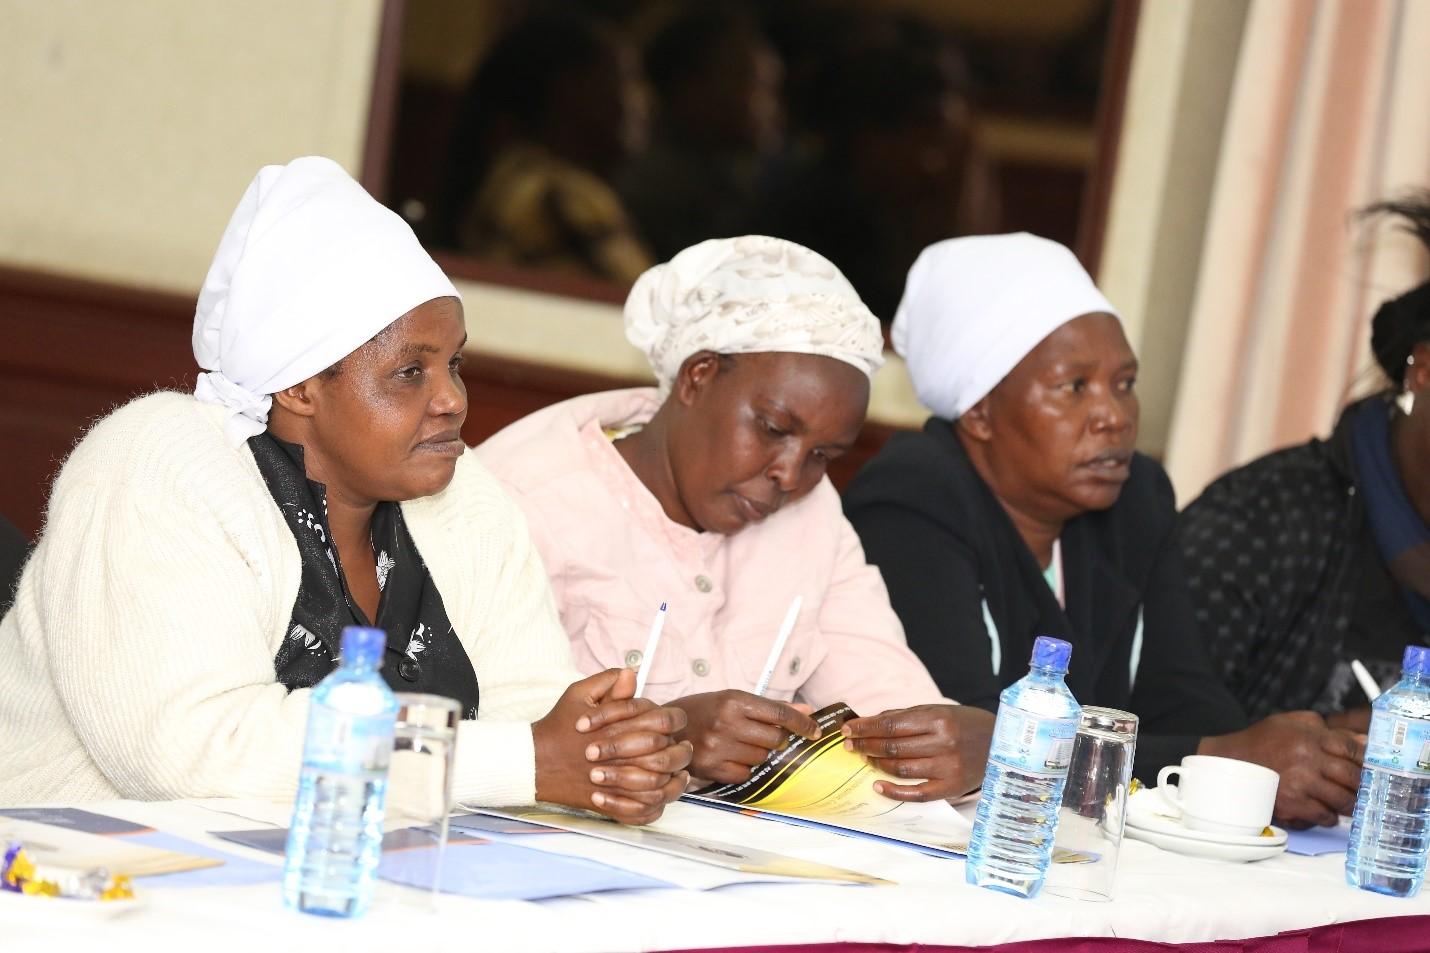 Chama women attend a voter education training session.